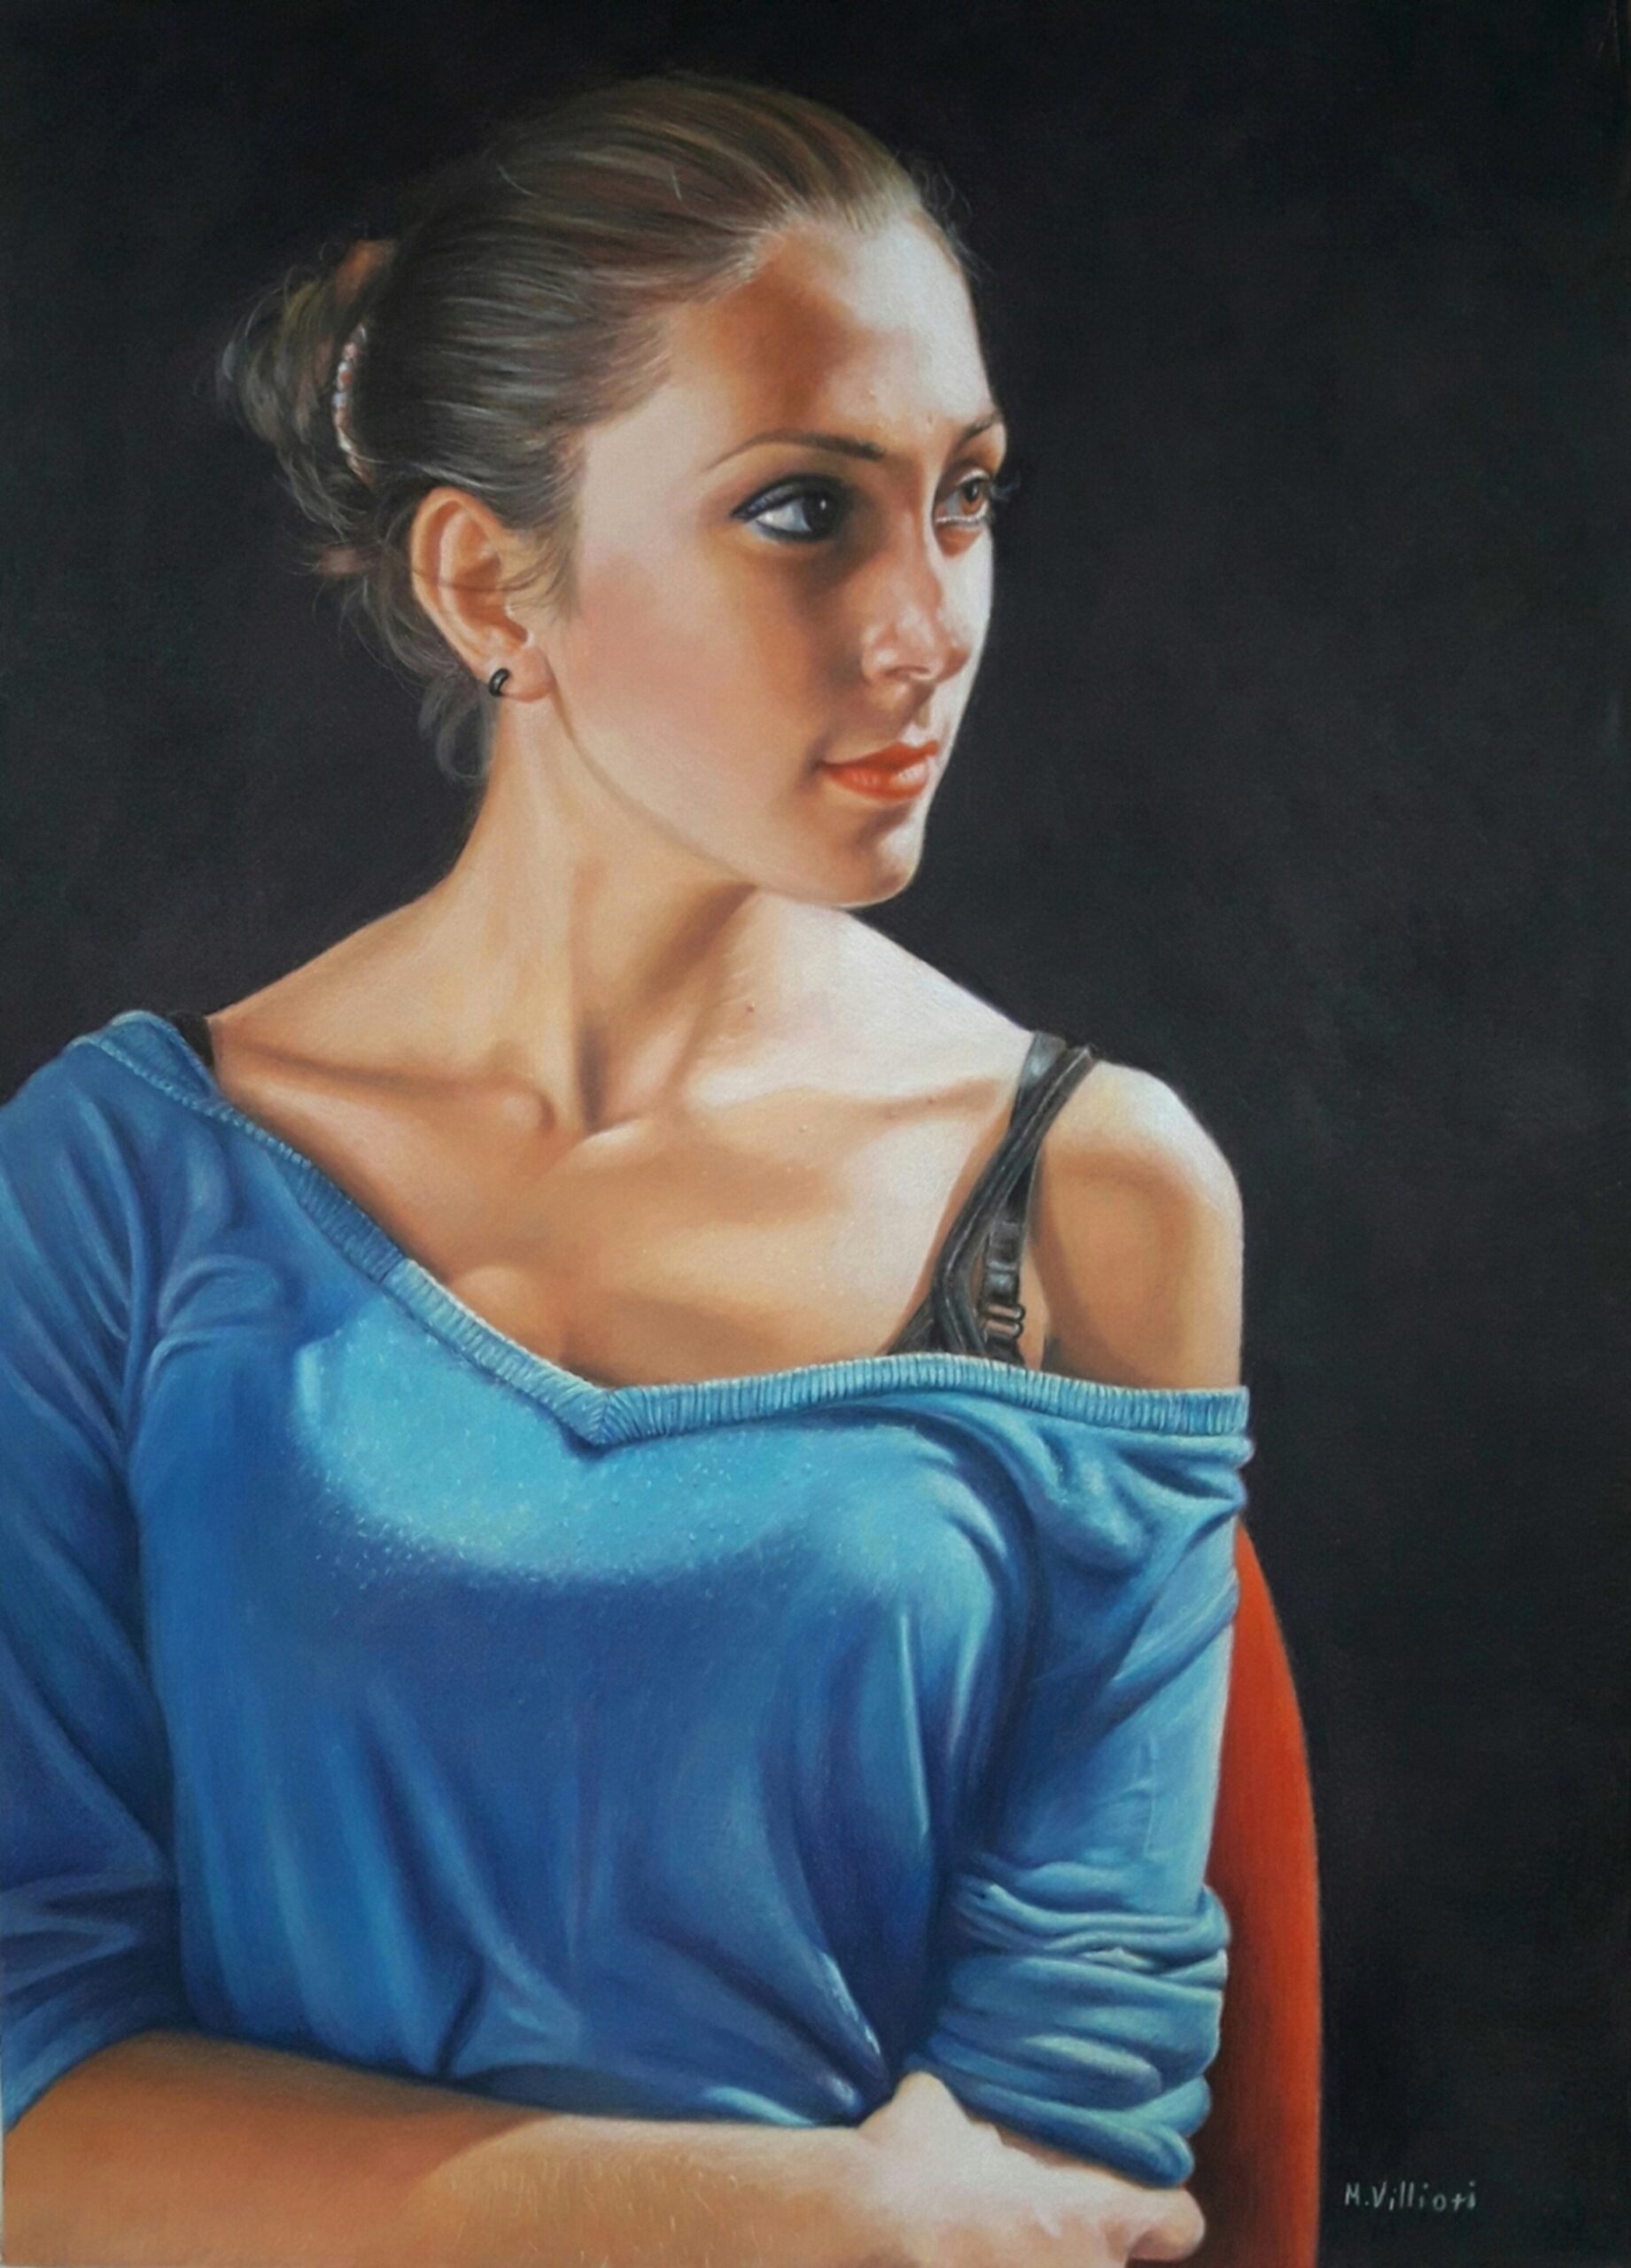 Maria Villioti Young Lady 28x20 Colored Pencils on Paper 1 scaled